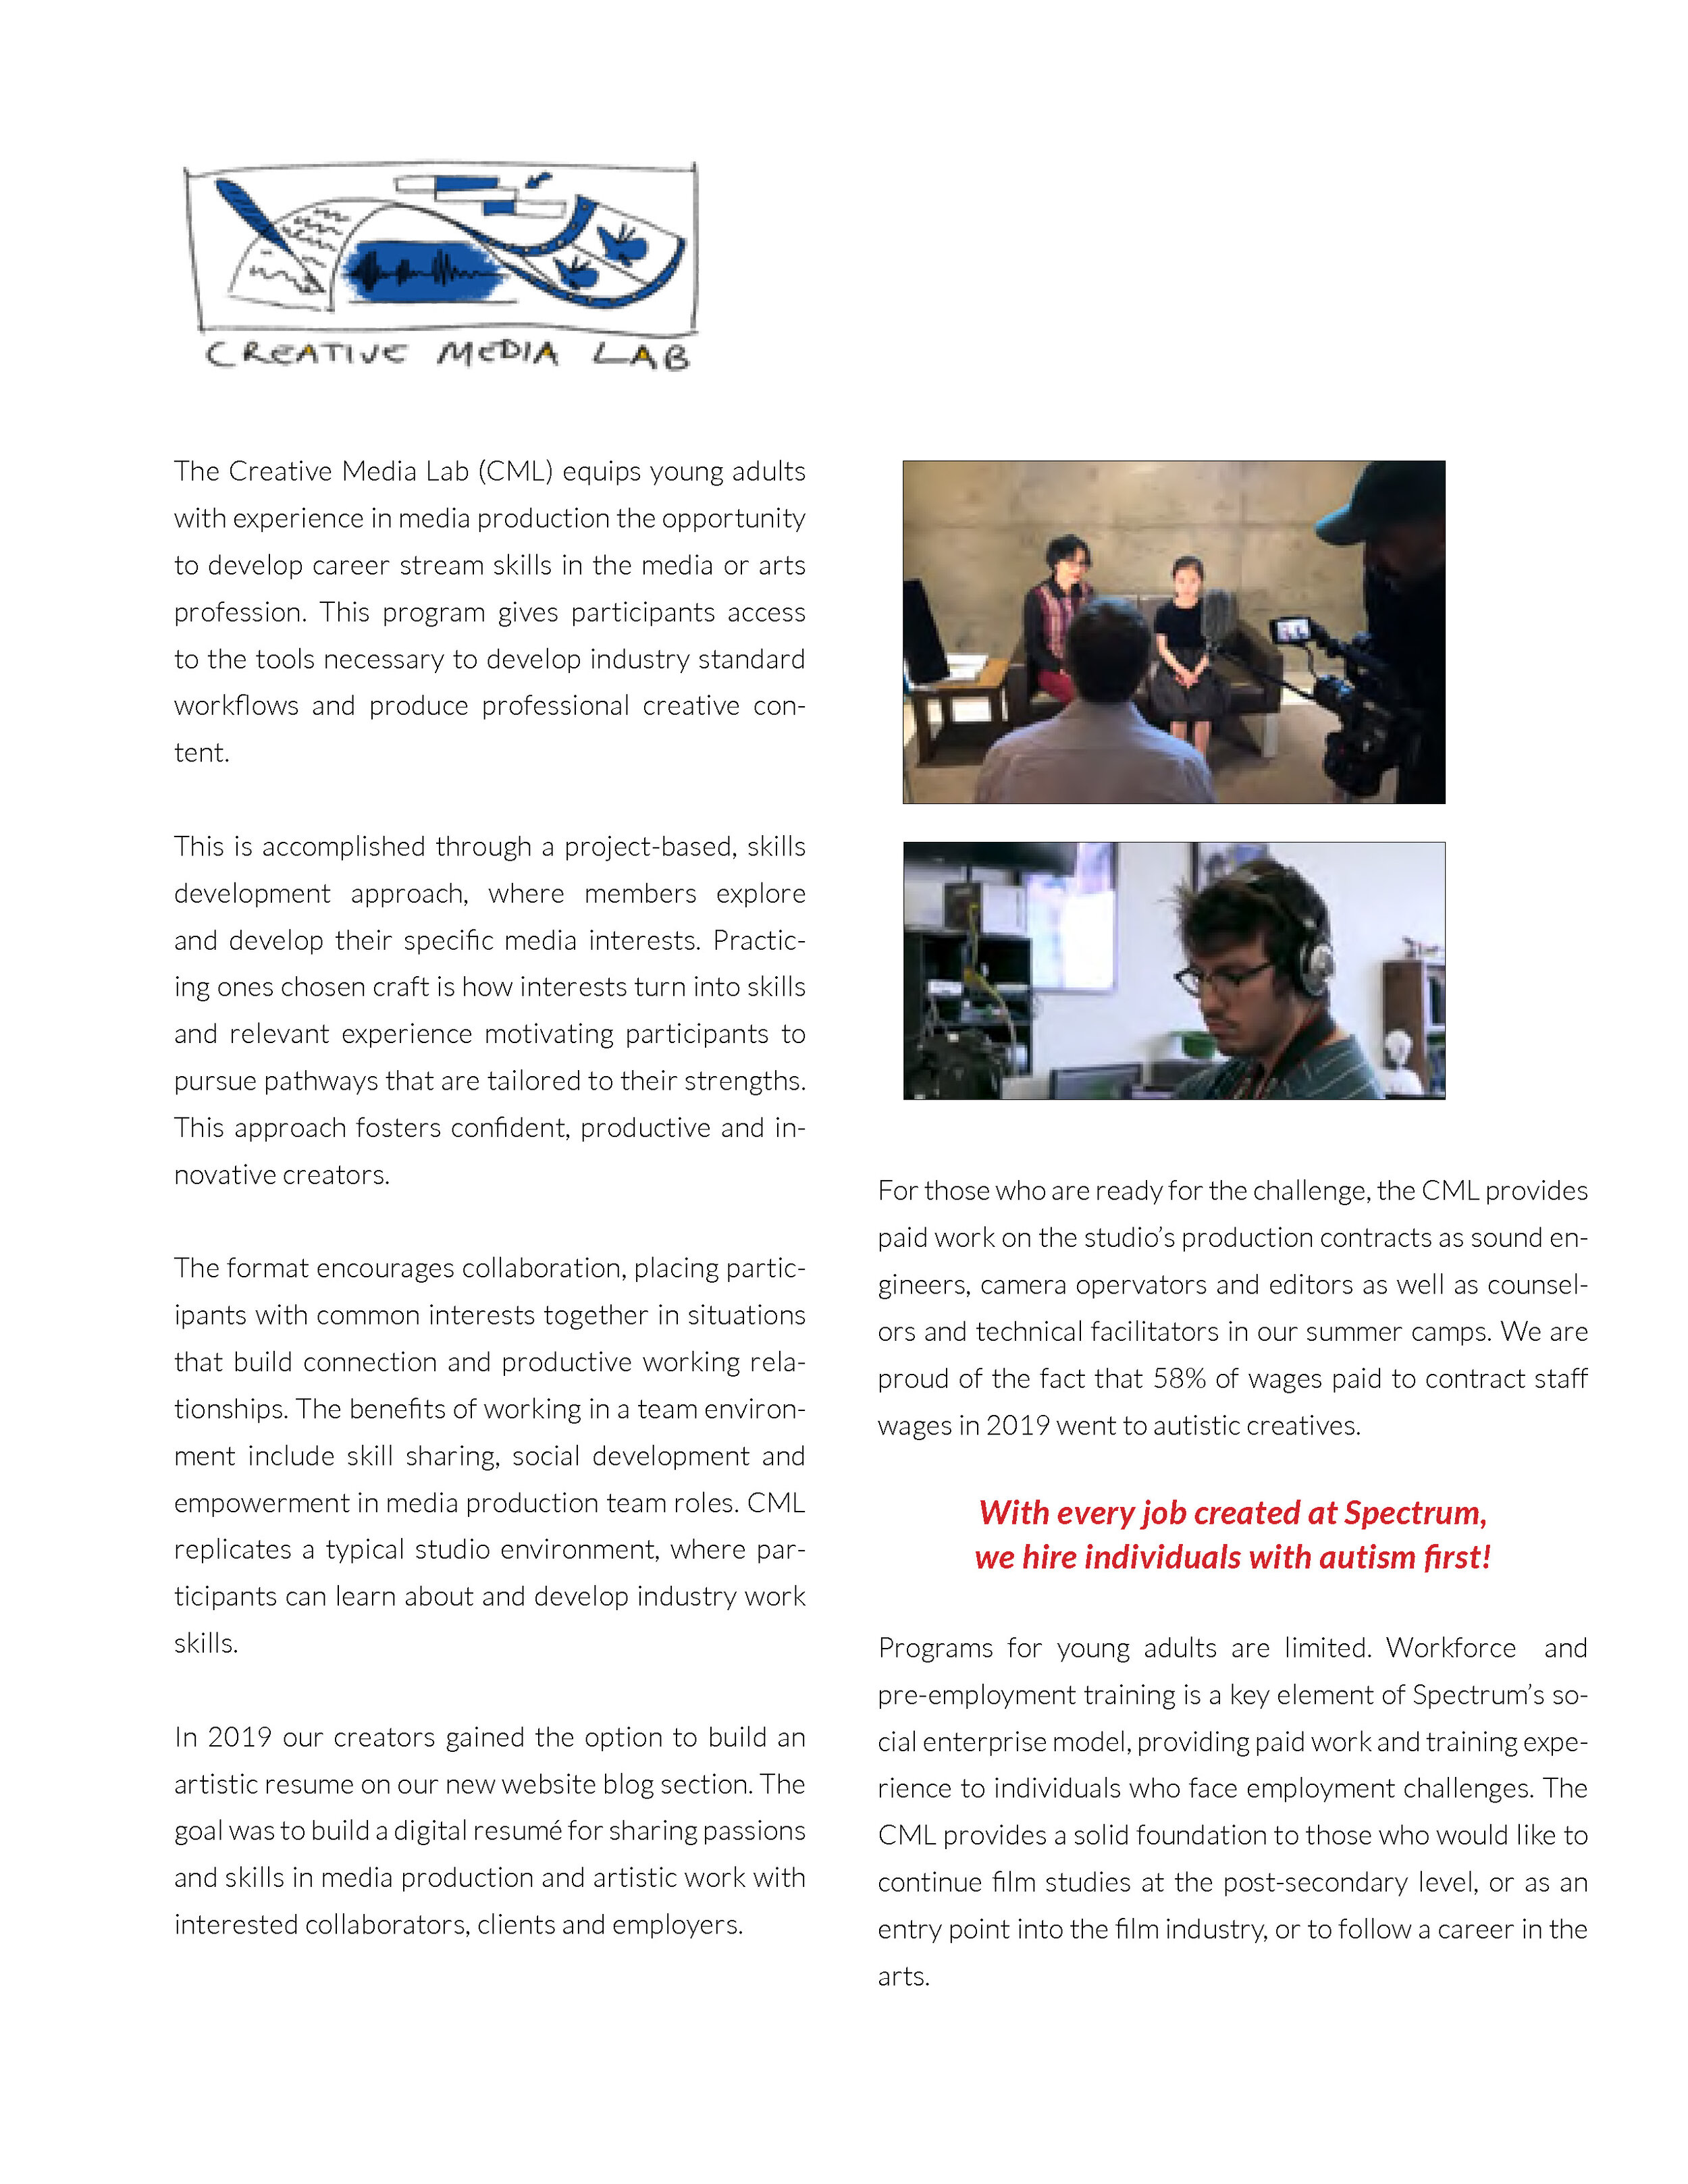 Spectrum Productions ANNUAL REPORT 2019-FinalEN_Page_08.jpg